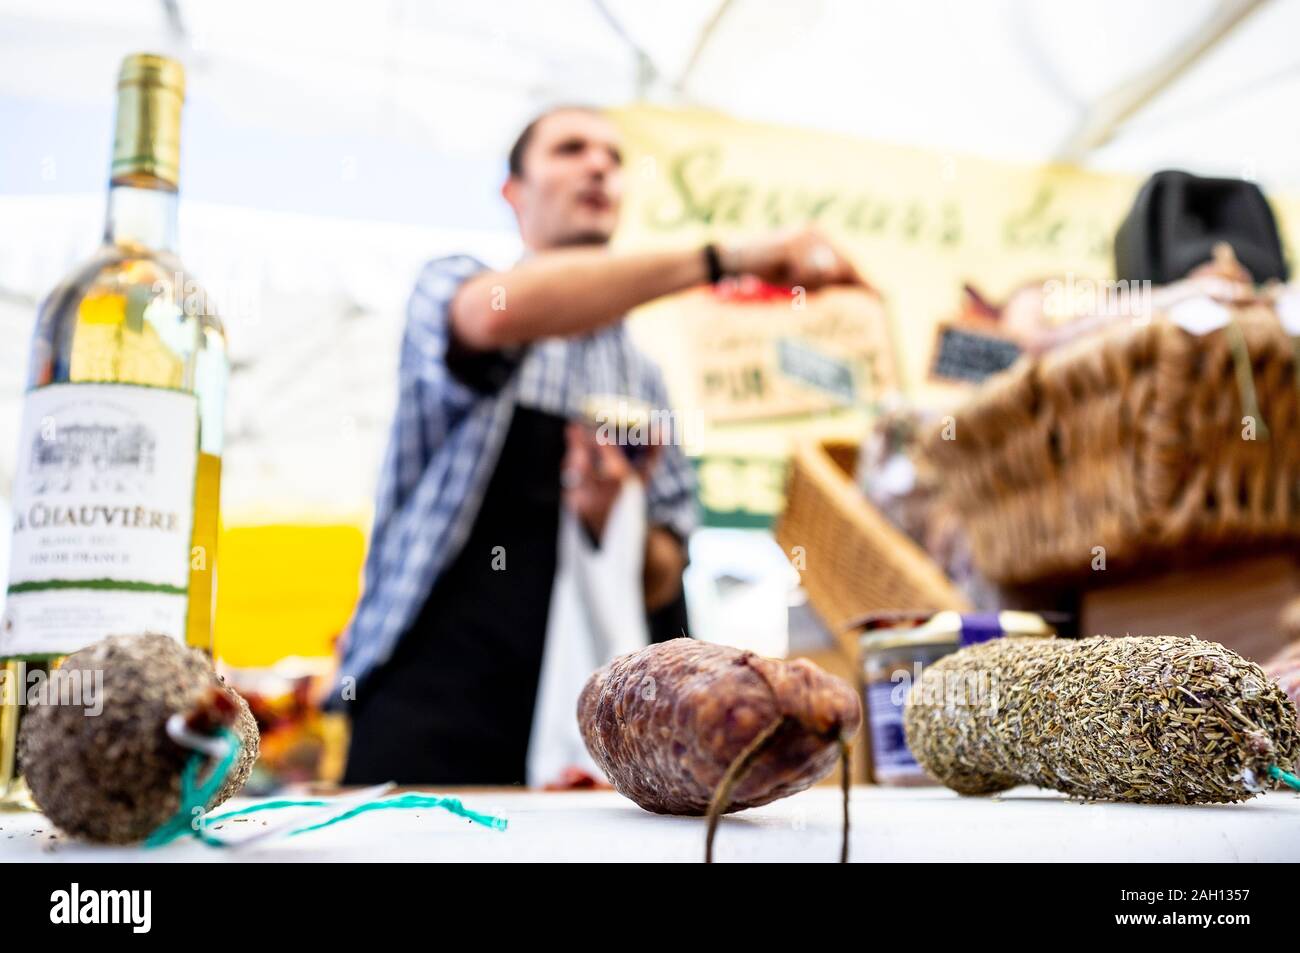 vendor selling local produce on a market in the sun in southern france Stock Photo